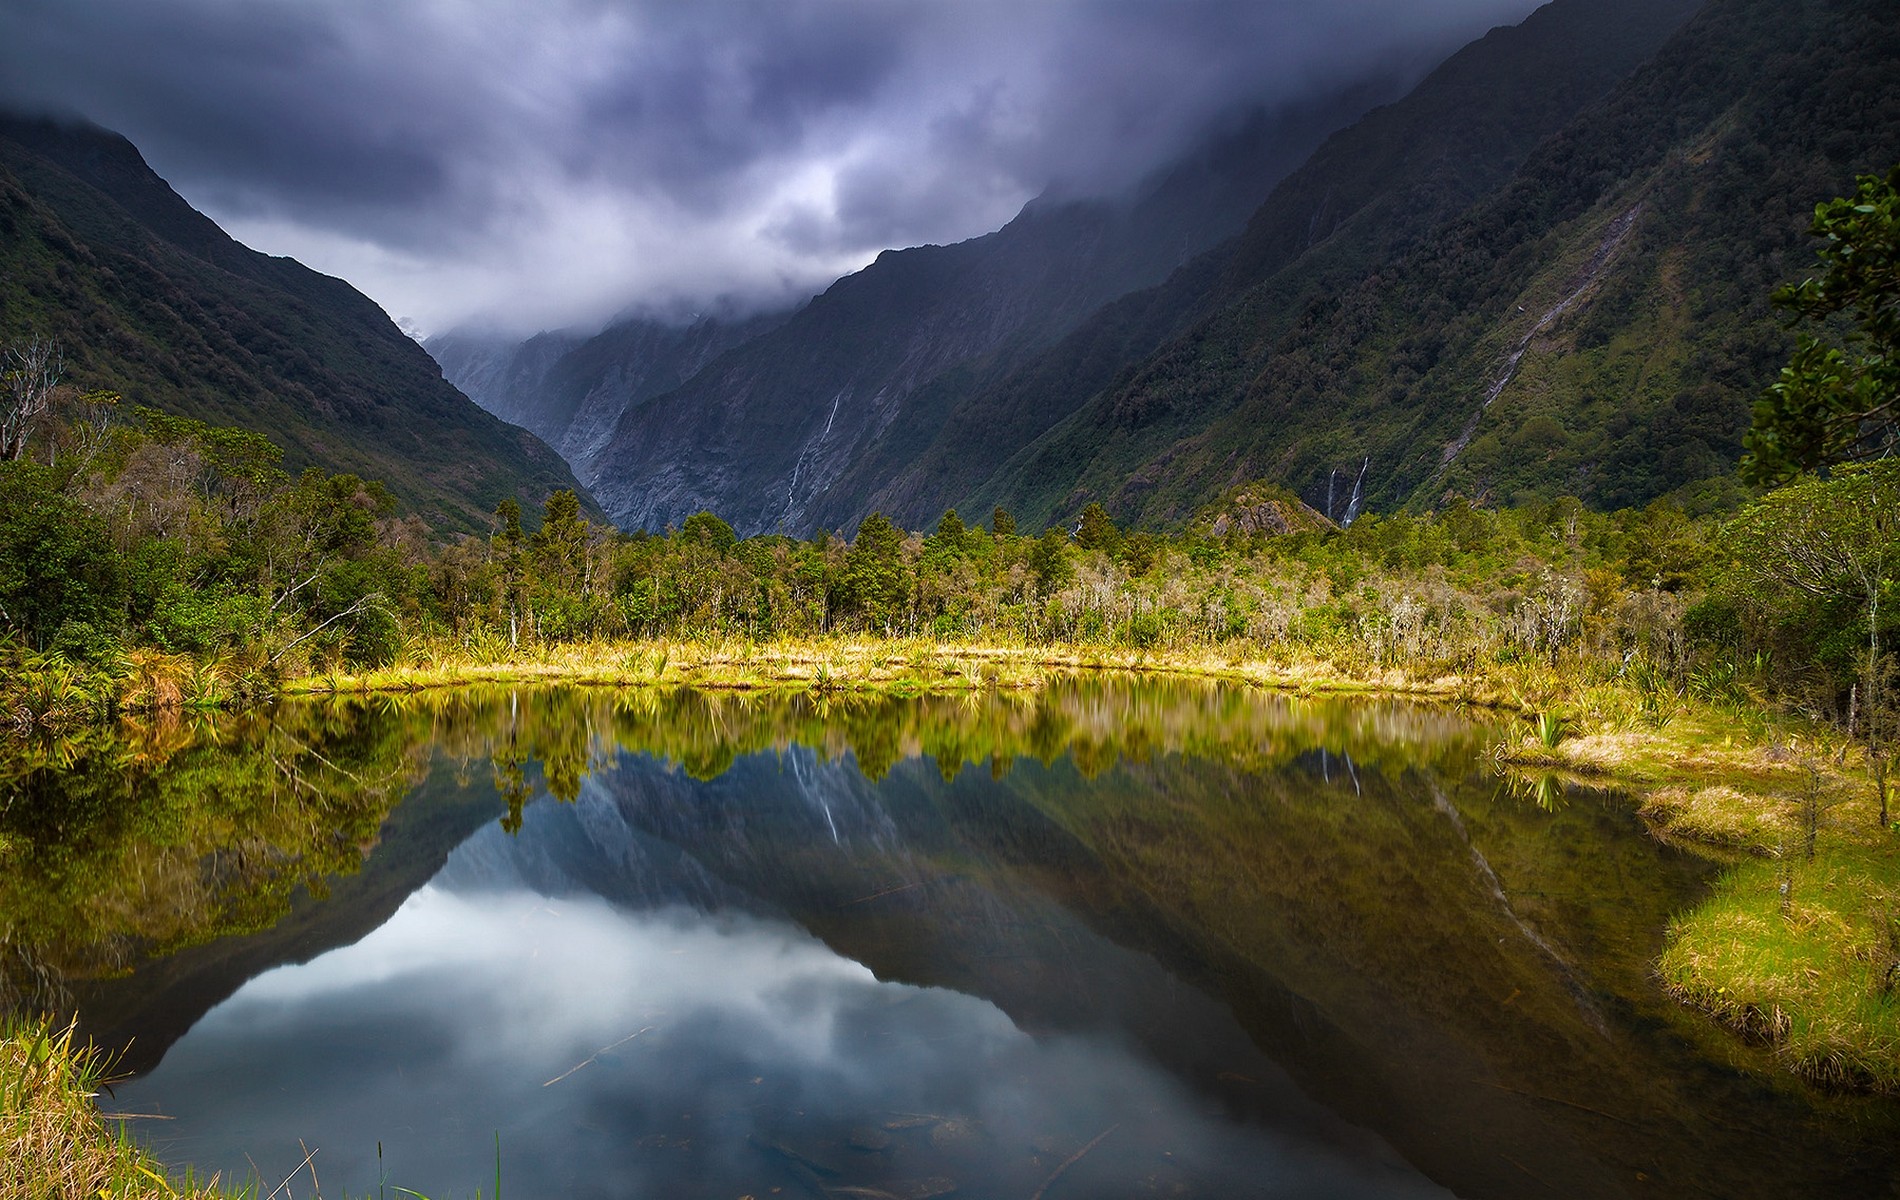 General 1900x1200 nature lake mountains landscape clouds grass shrubs reflection waterfall valley New Zealand